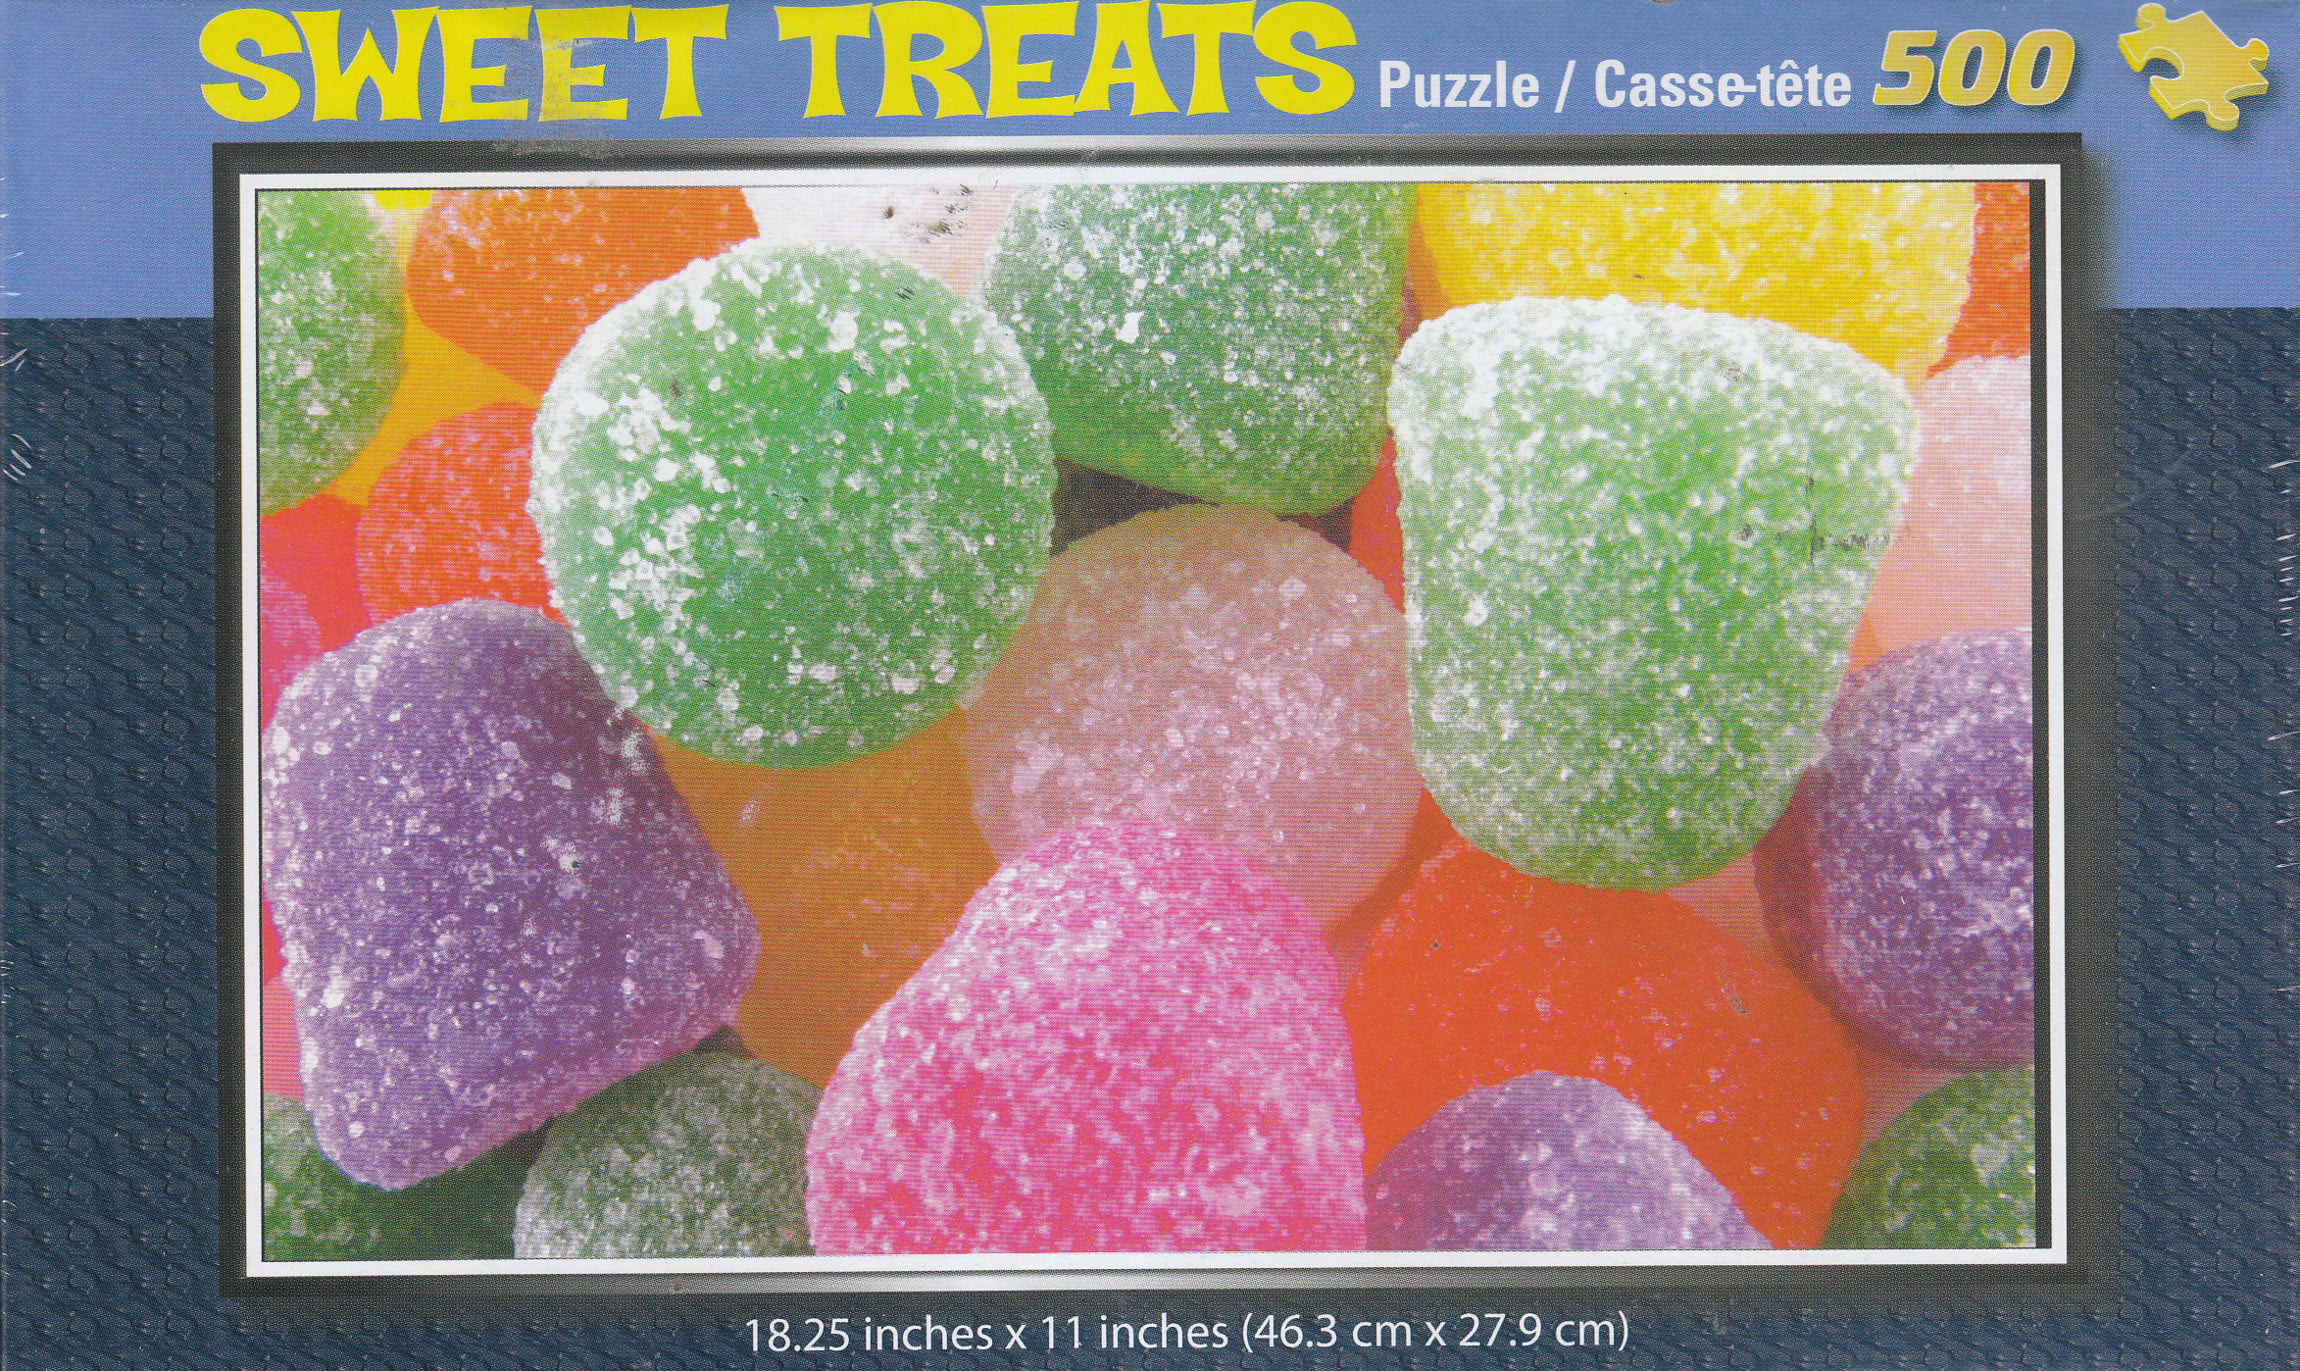 Gum Drops Sweet Treats  Jigsaw Puzzle New In Box 500 Pieces 